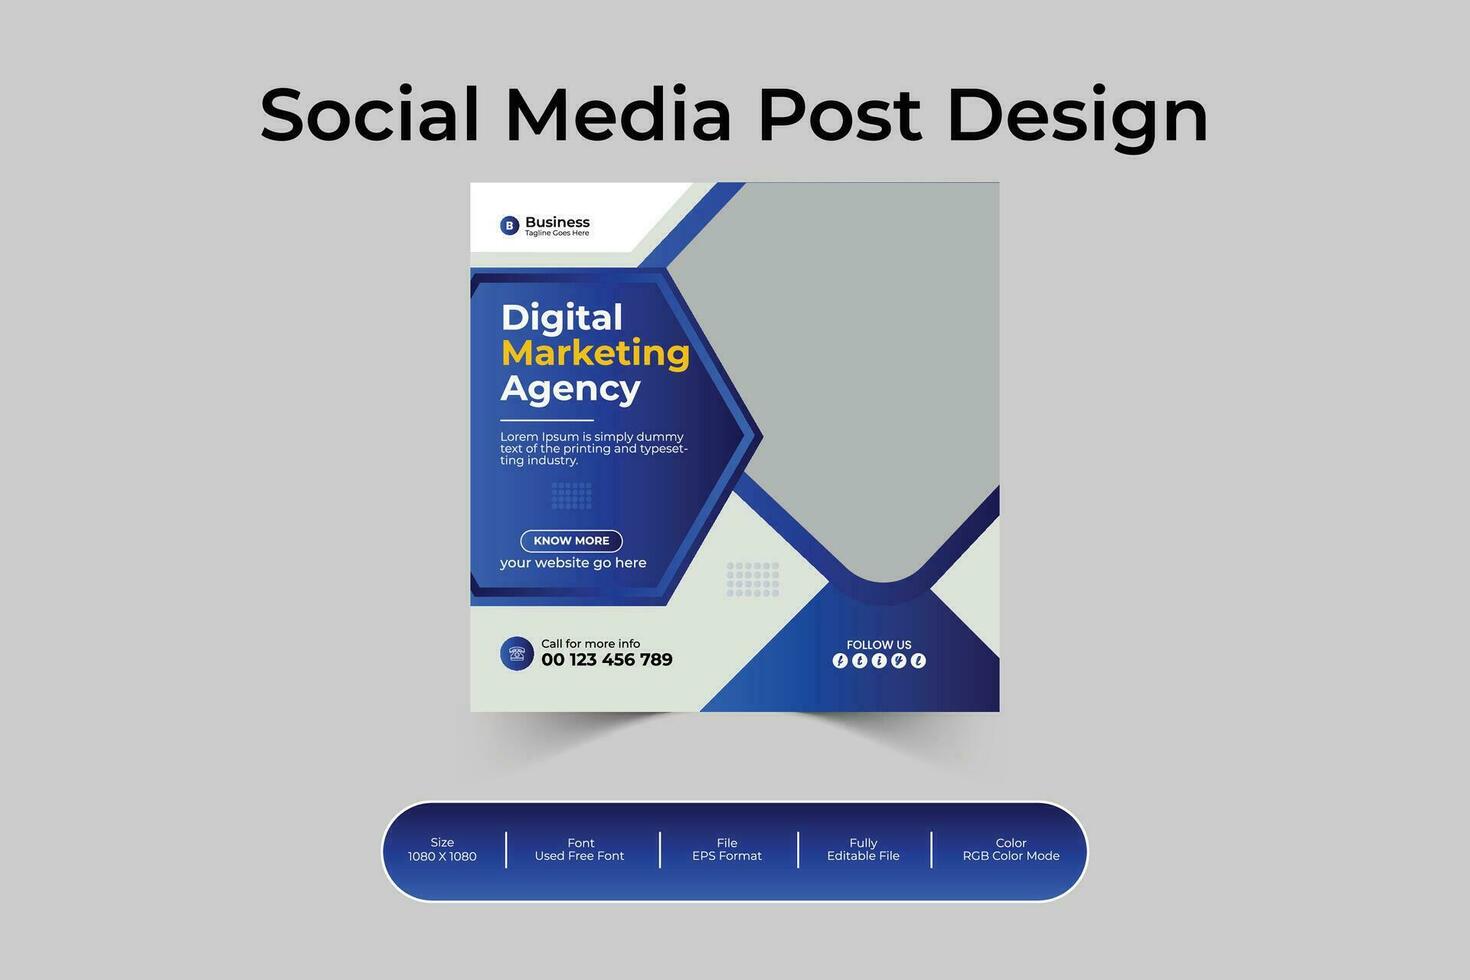 Social media post design and square banner with creative, professional, eye catching and modern layout vector